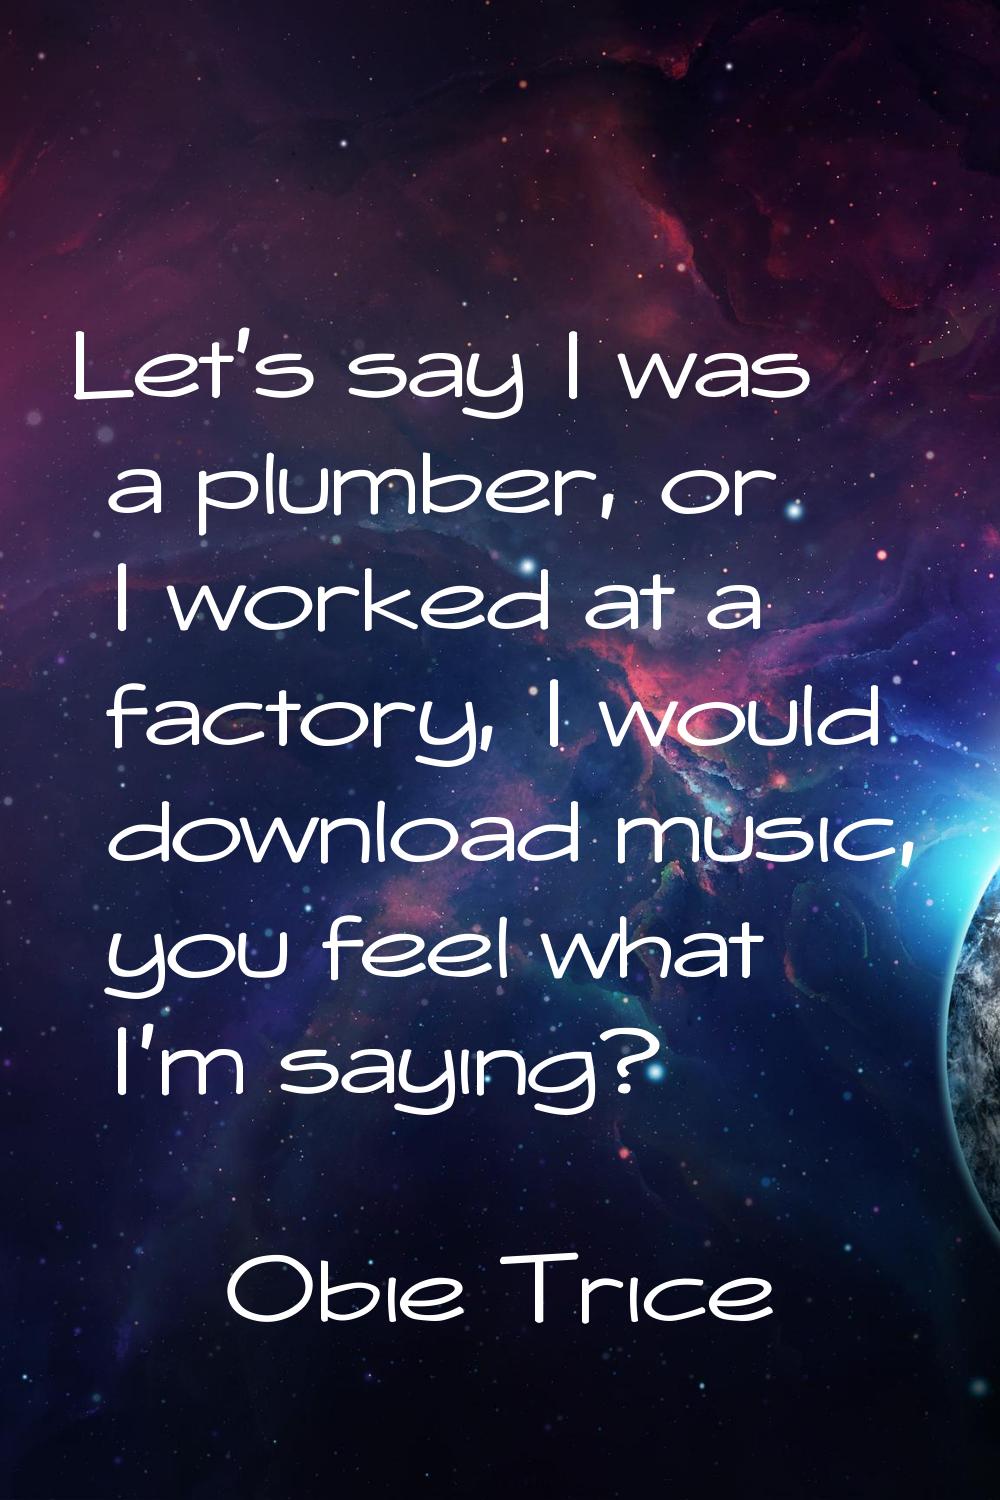 Let's say I was a plumber, or I worked at a factory, I would download music, you feel what I'm sayi